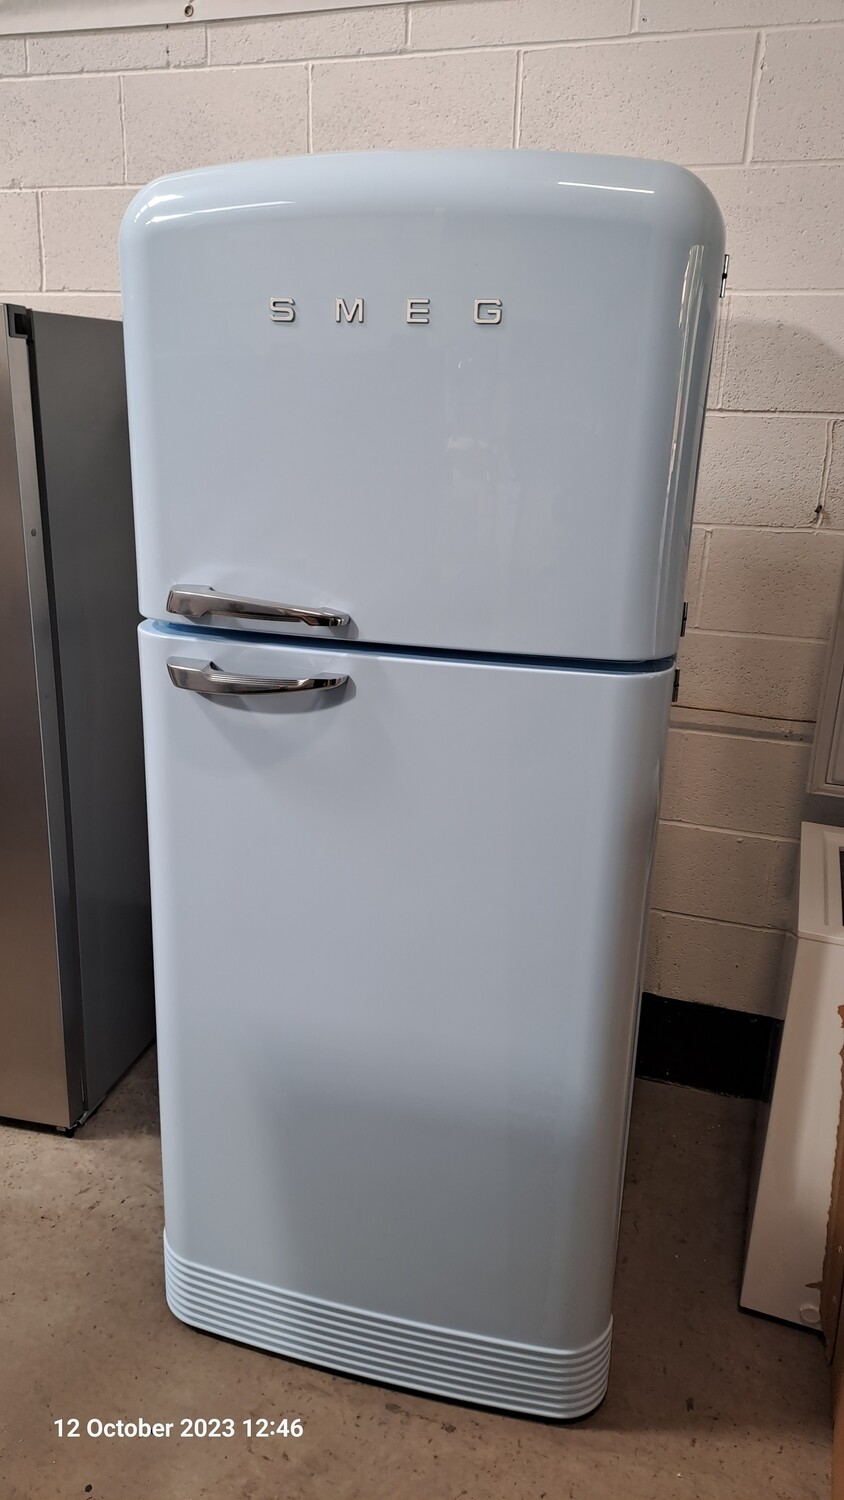 Smeg FAB50RPB5 Retro Style Frost Free Fridge Freezer H192 x W79.6 x D85cm Powder Blue. Mint Condition This item is located in our Whitby Road shop